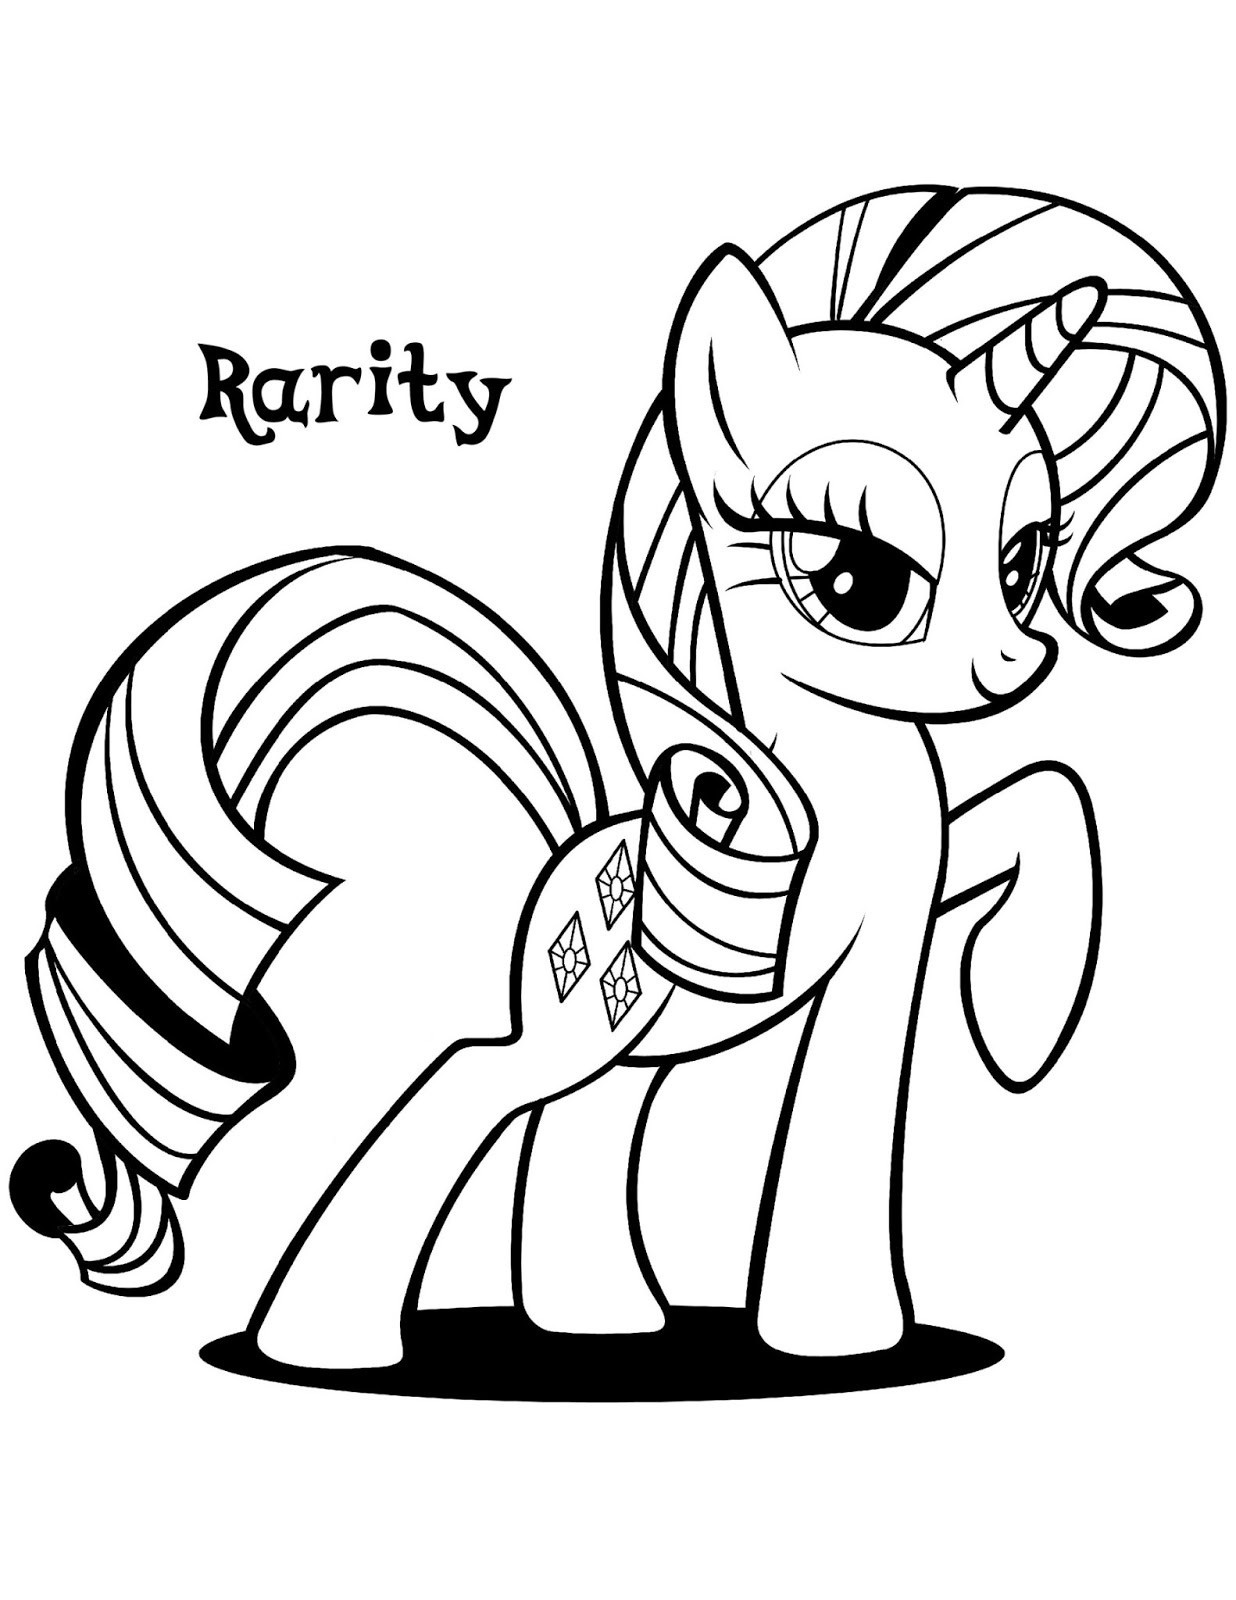 Rarity Unicorn Coloring Page   Free Printable Coloring Pages for Kids